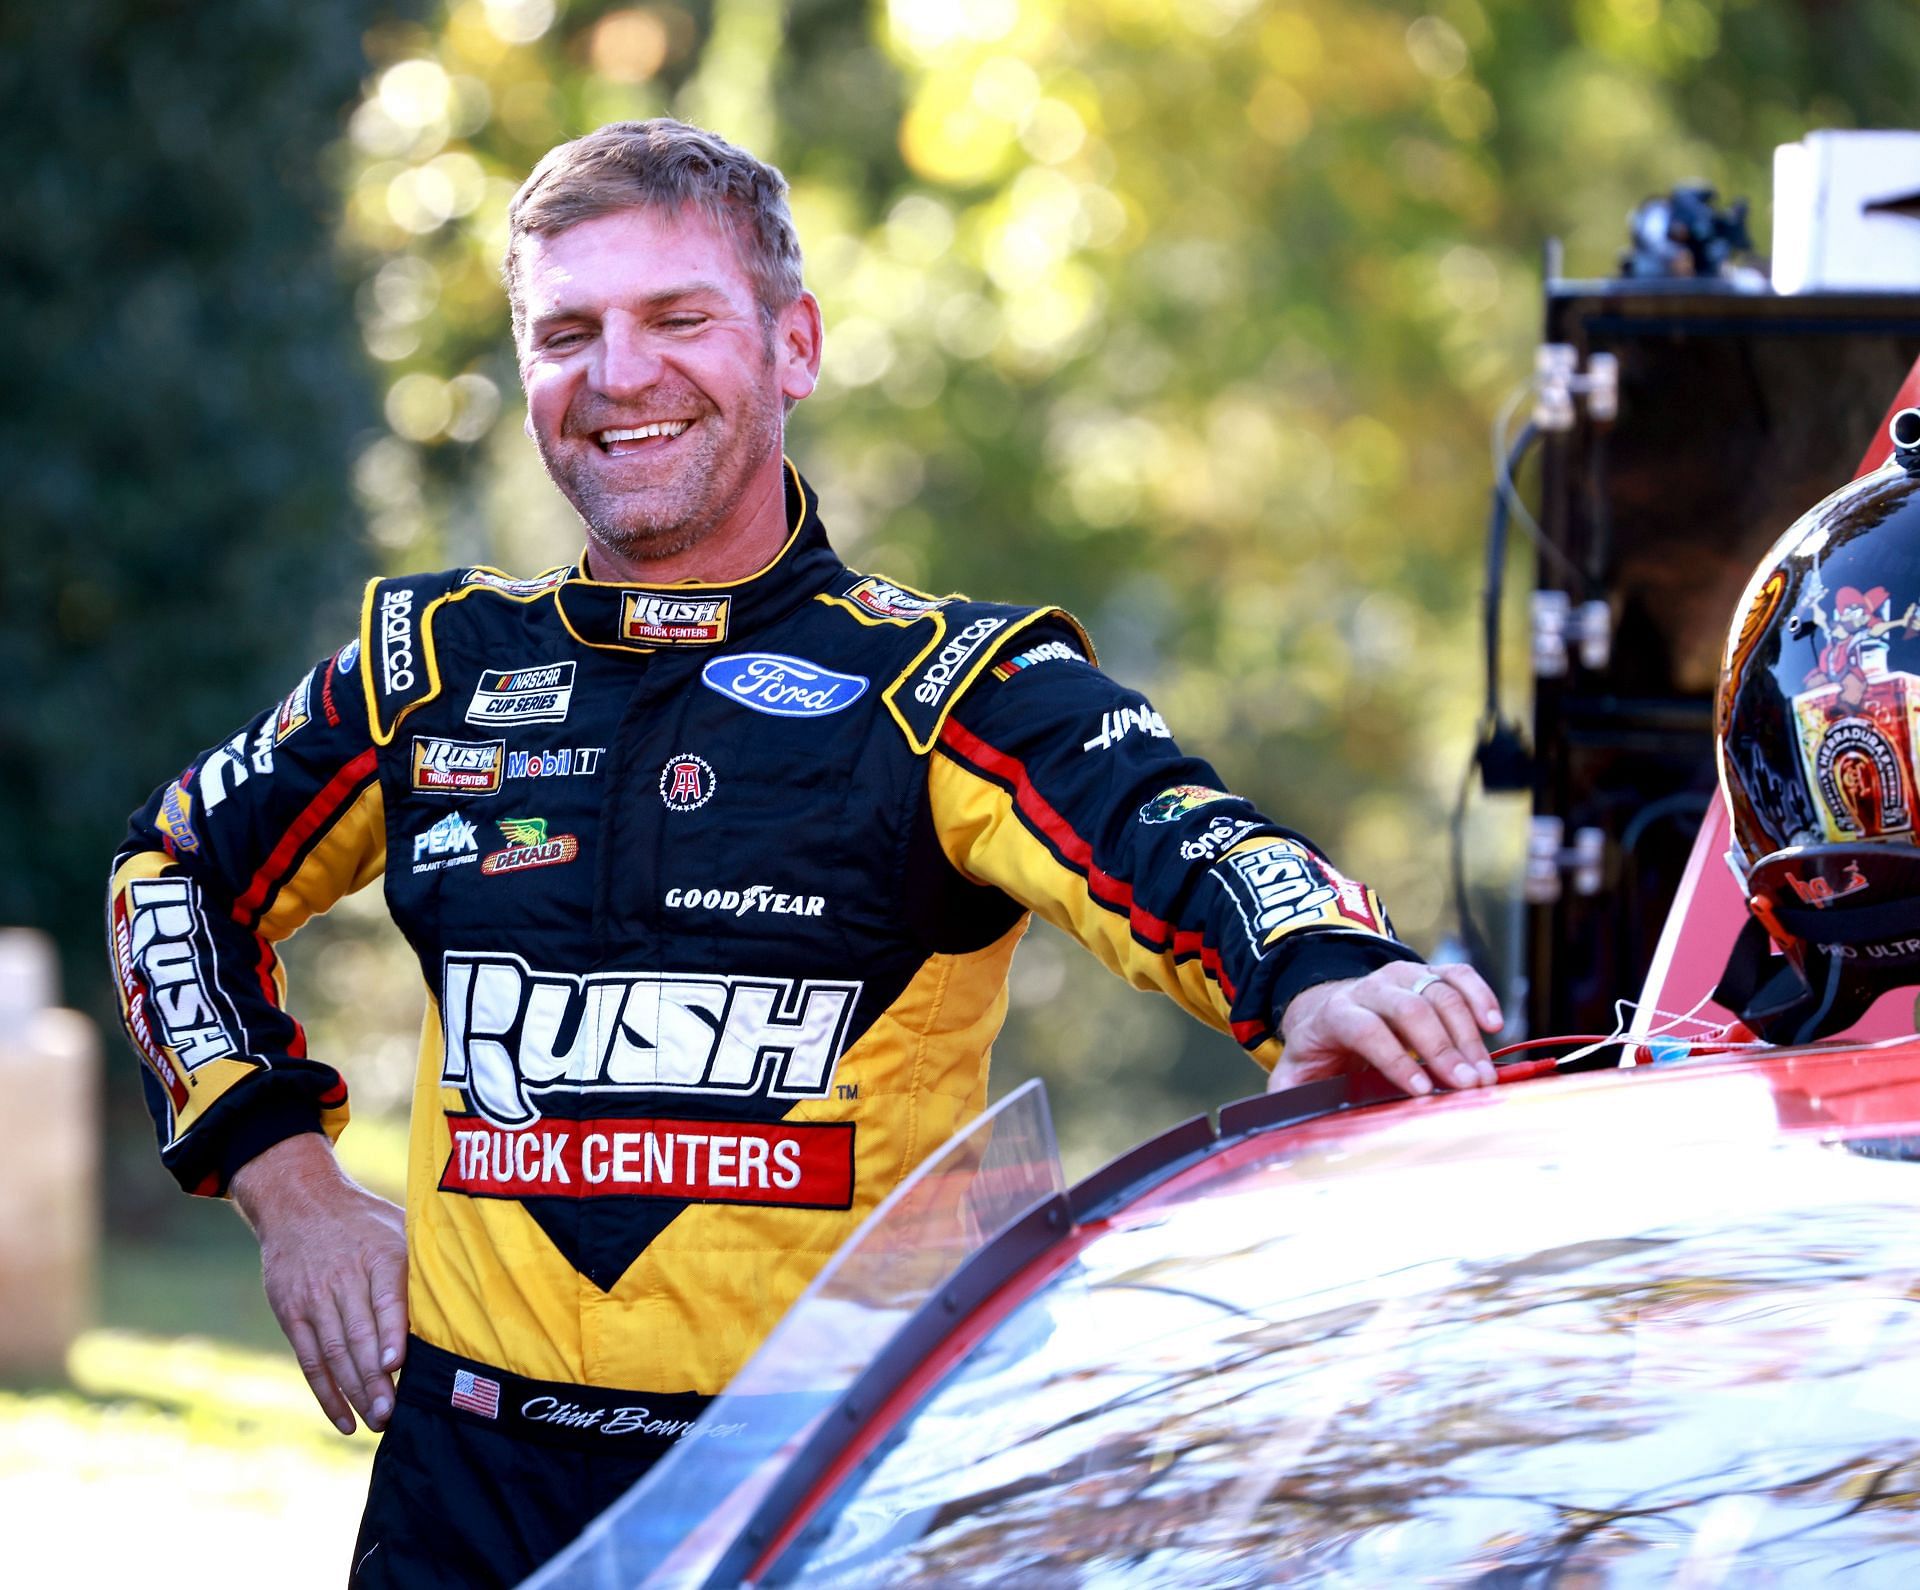 Clint Bowyer smiles as he climbs out of the NASCAR Next Gen car during a testing session at Bowman Gray Stadium (Photo by Grant Halverson/Getty Images)